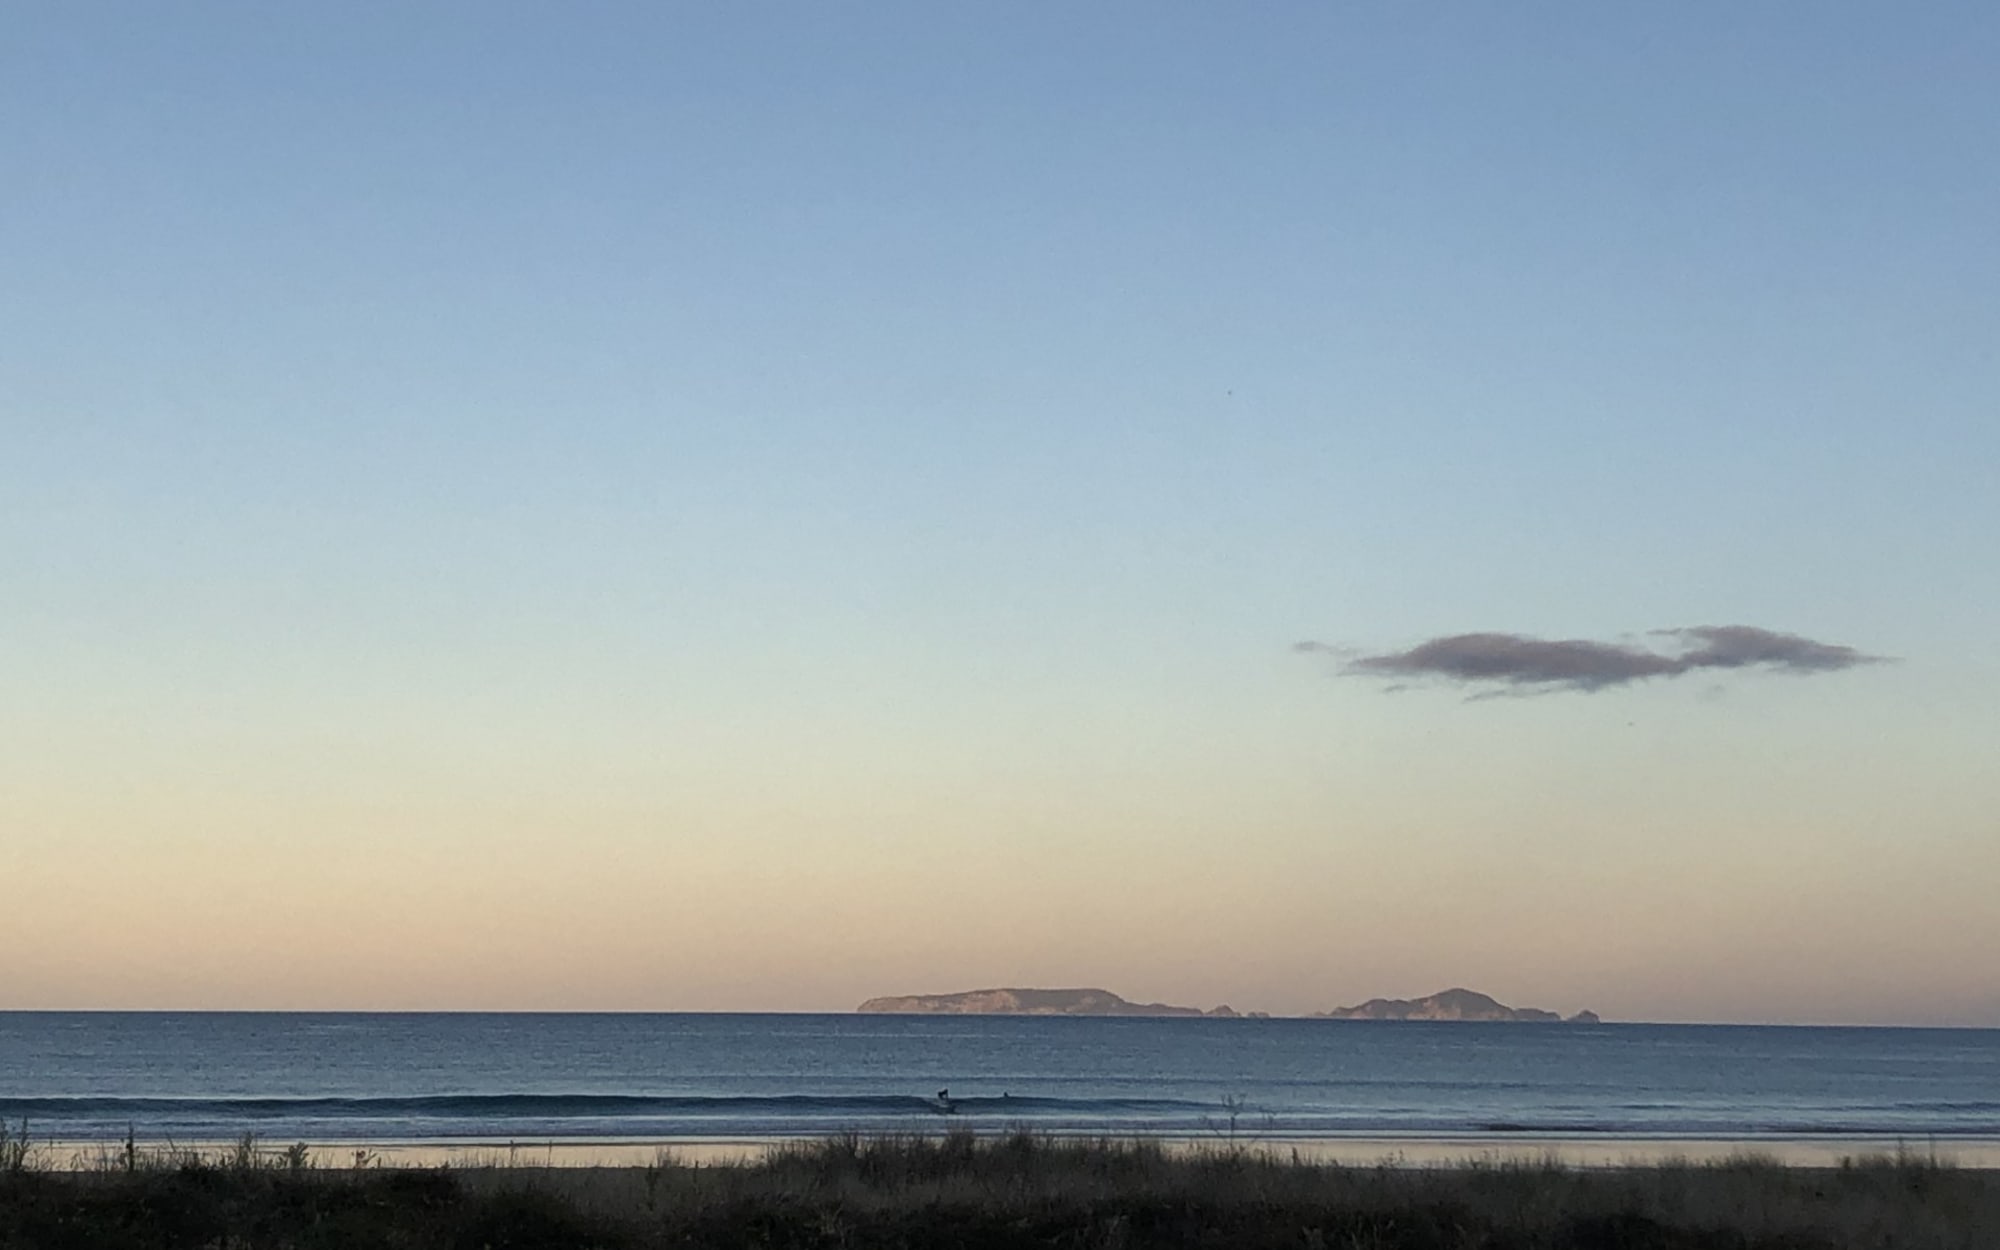 The Poor Knights Islands at dusk, seen from Sandy Bay, Northland.